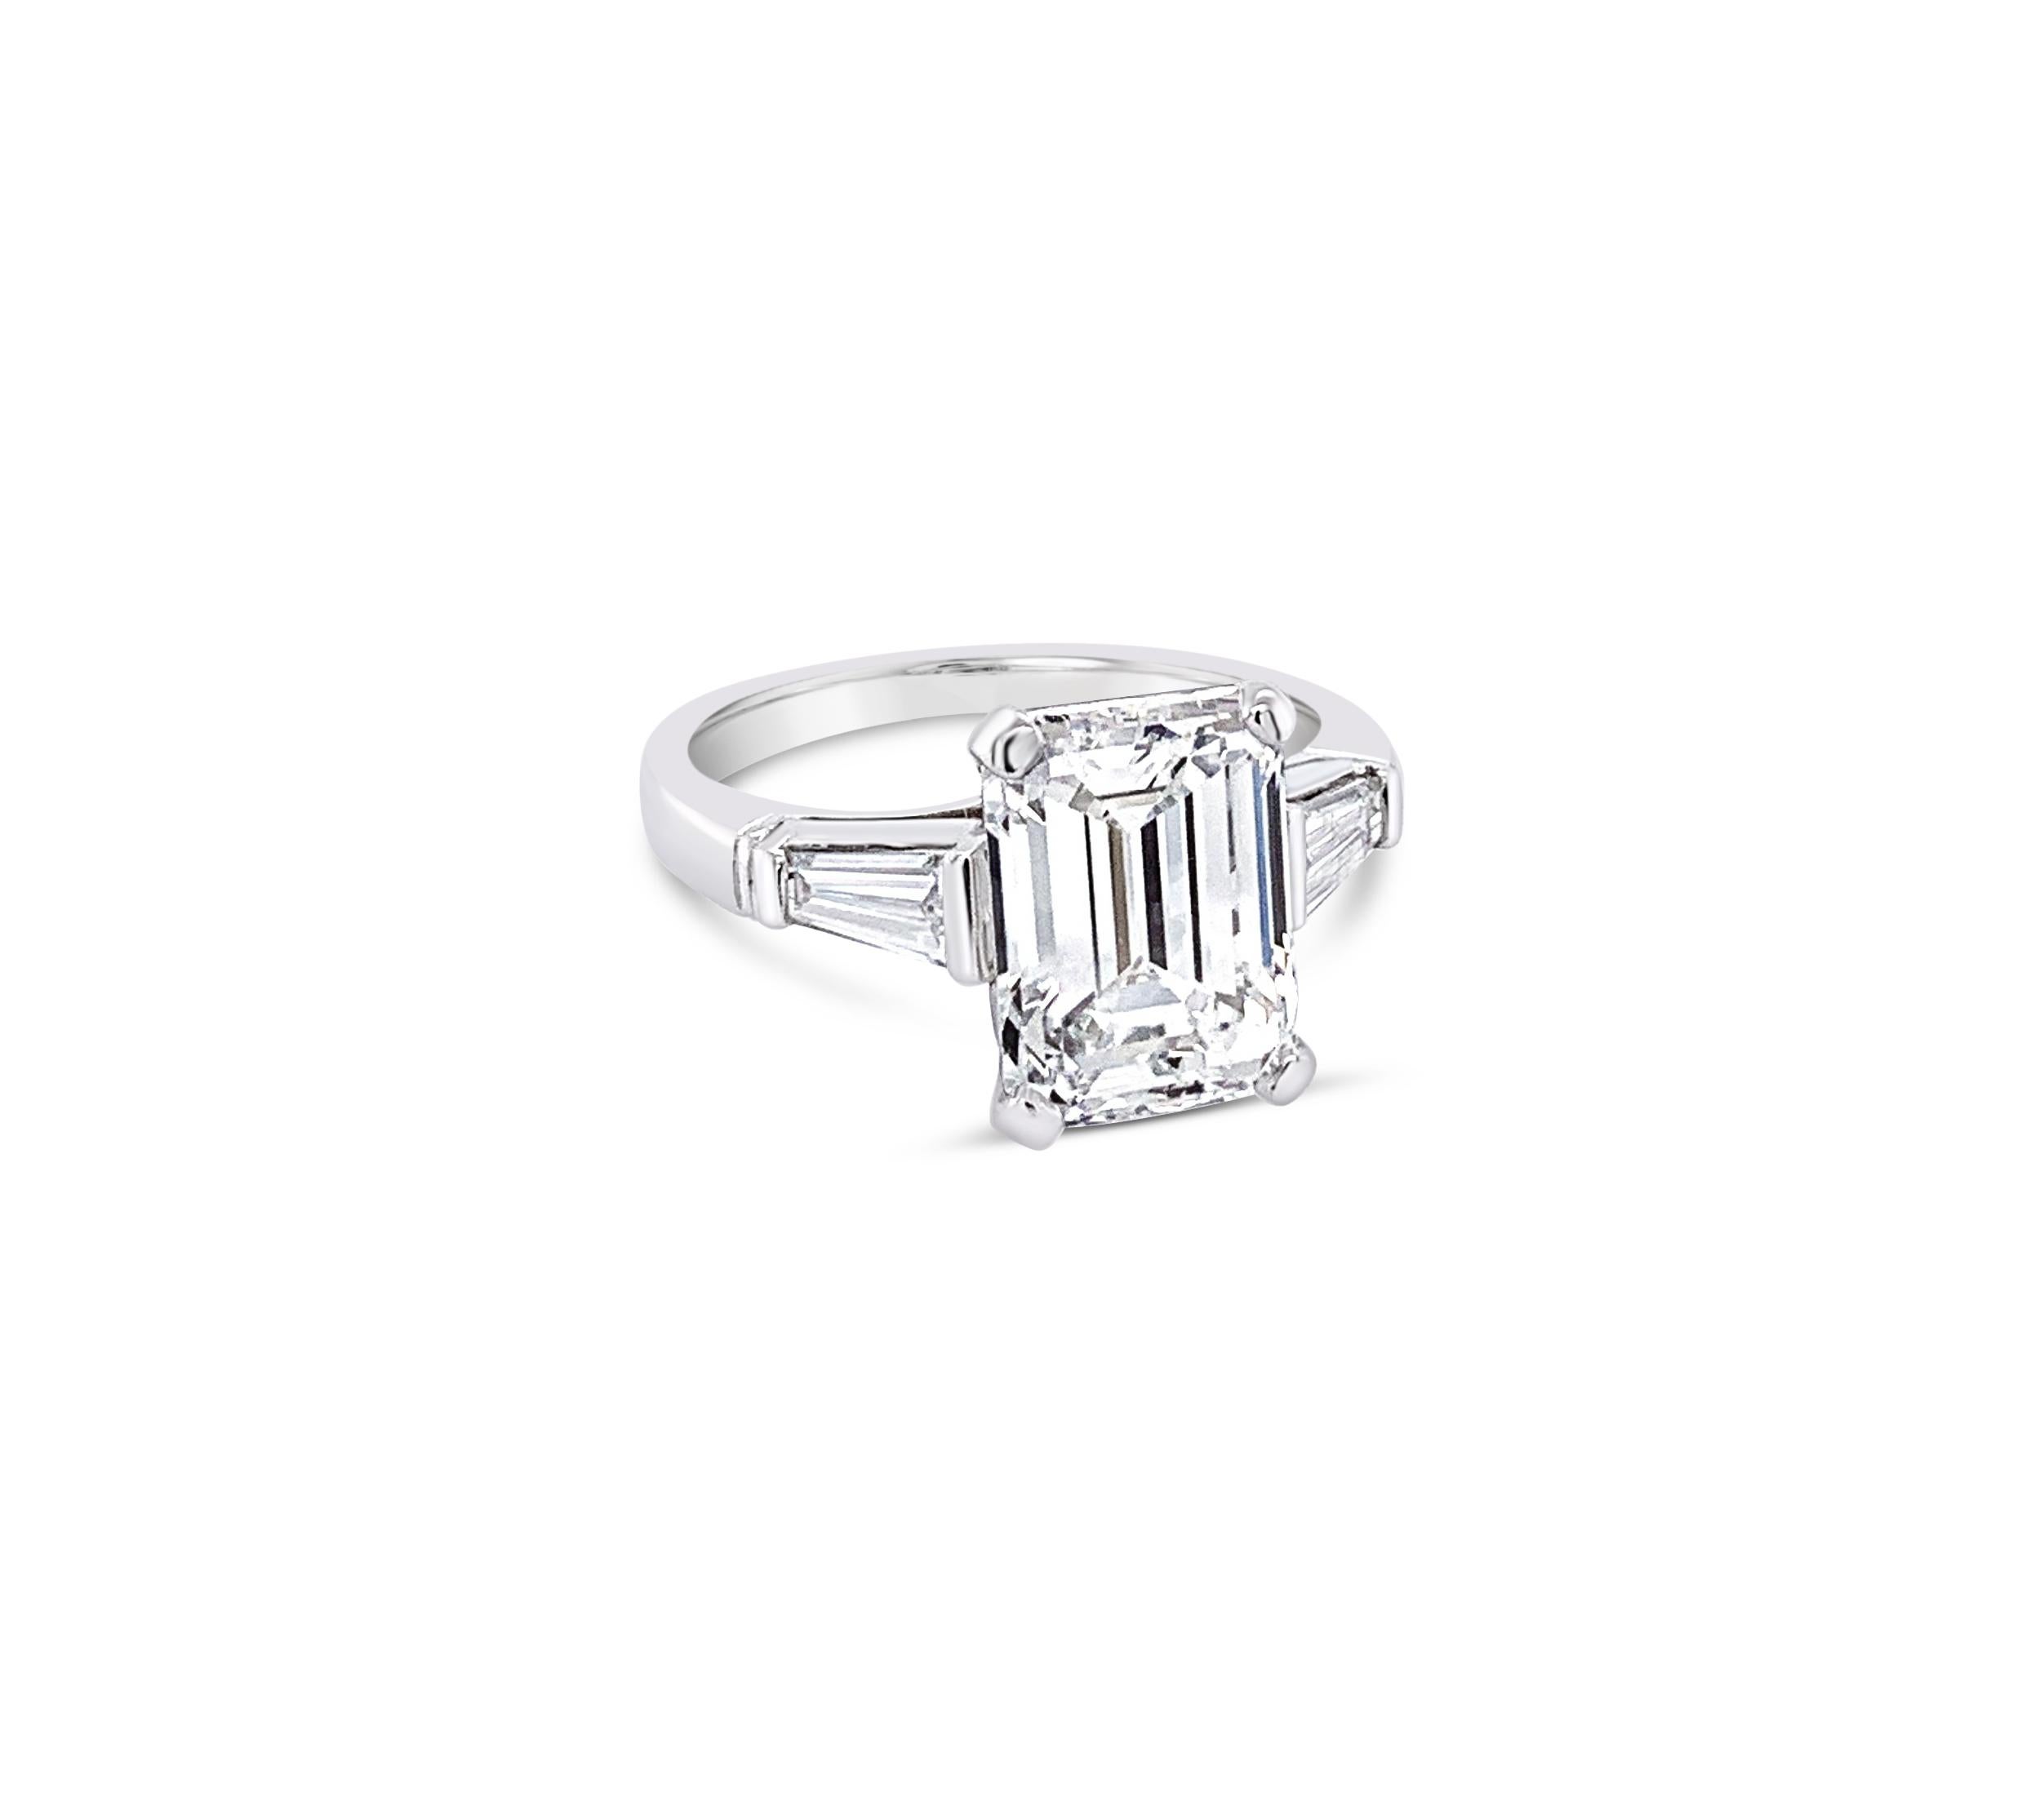 GIA Certified 3.18 Carat Emerald Cut Diamond Ring in Platinum In Excellent Condition For Sale In Palm Beach, FL